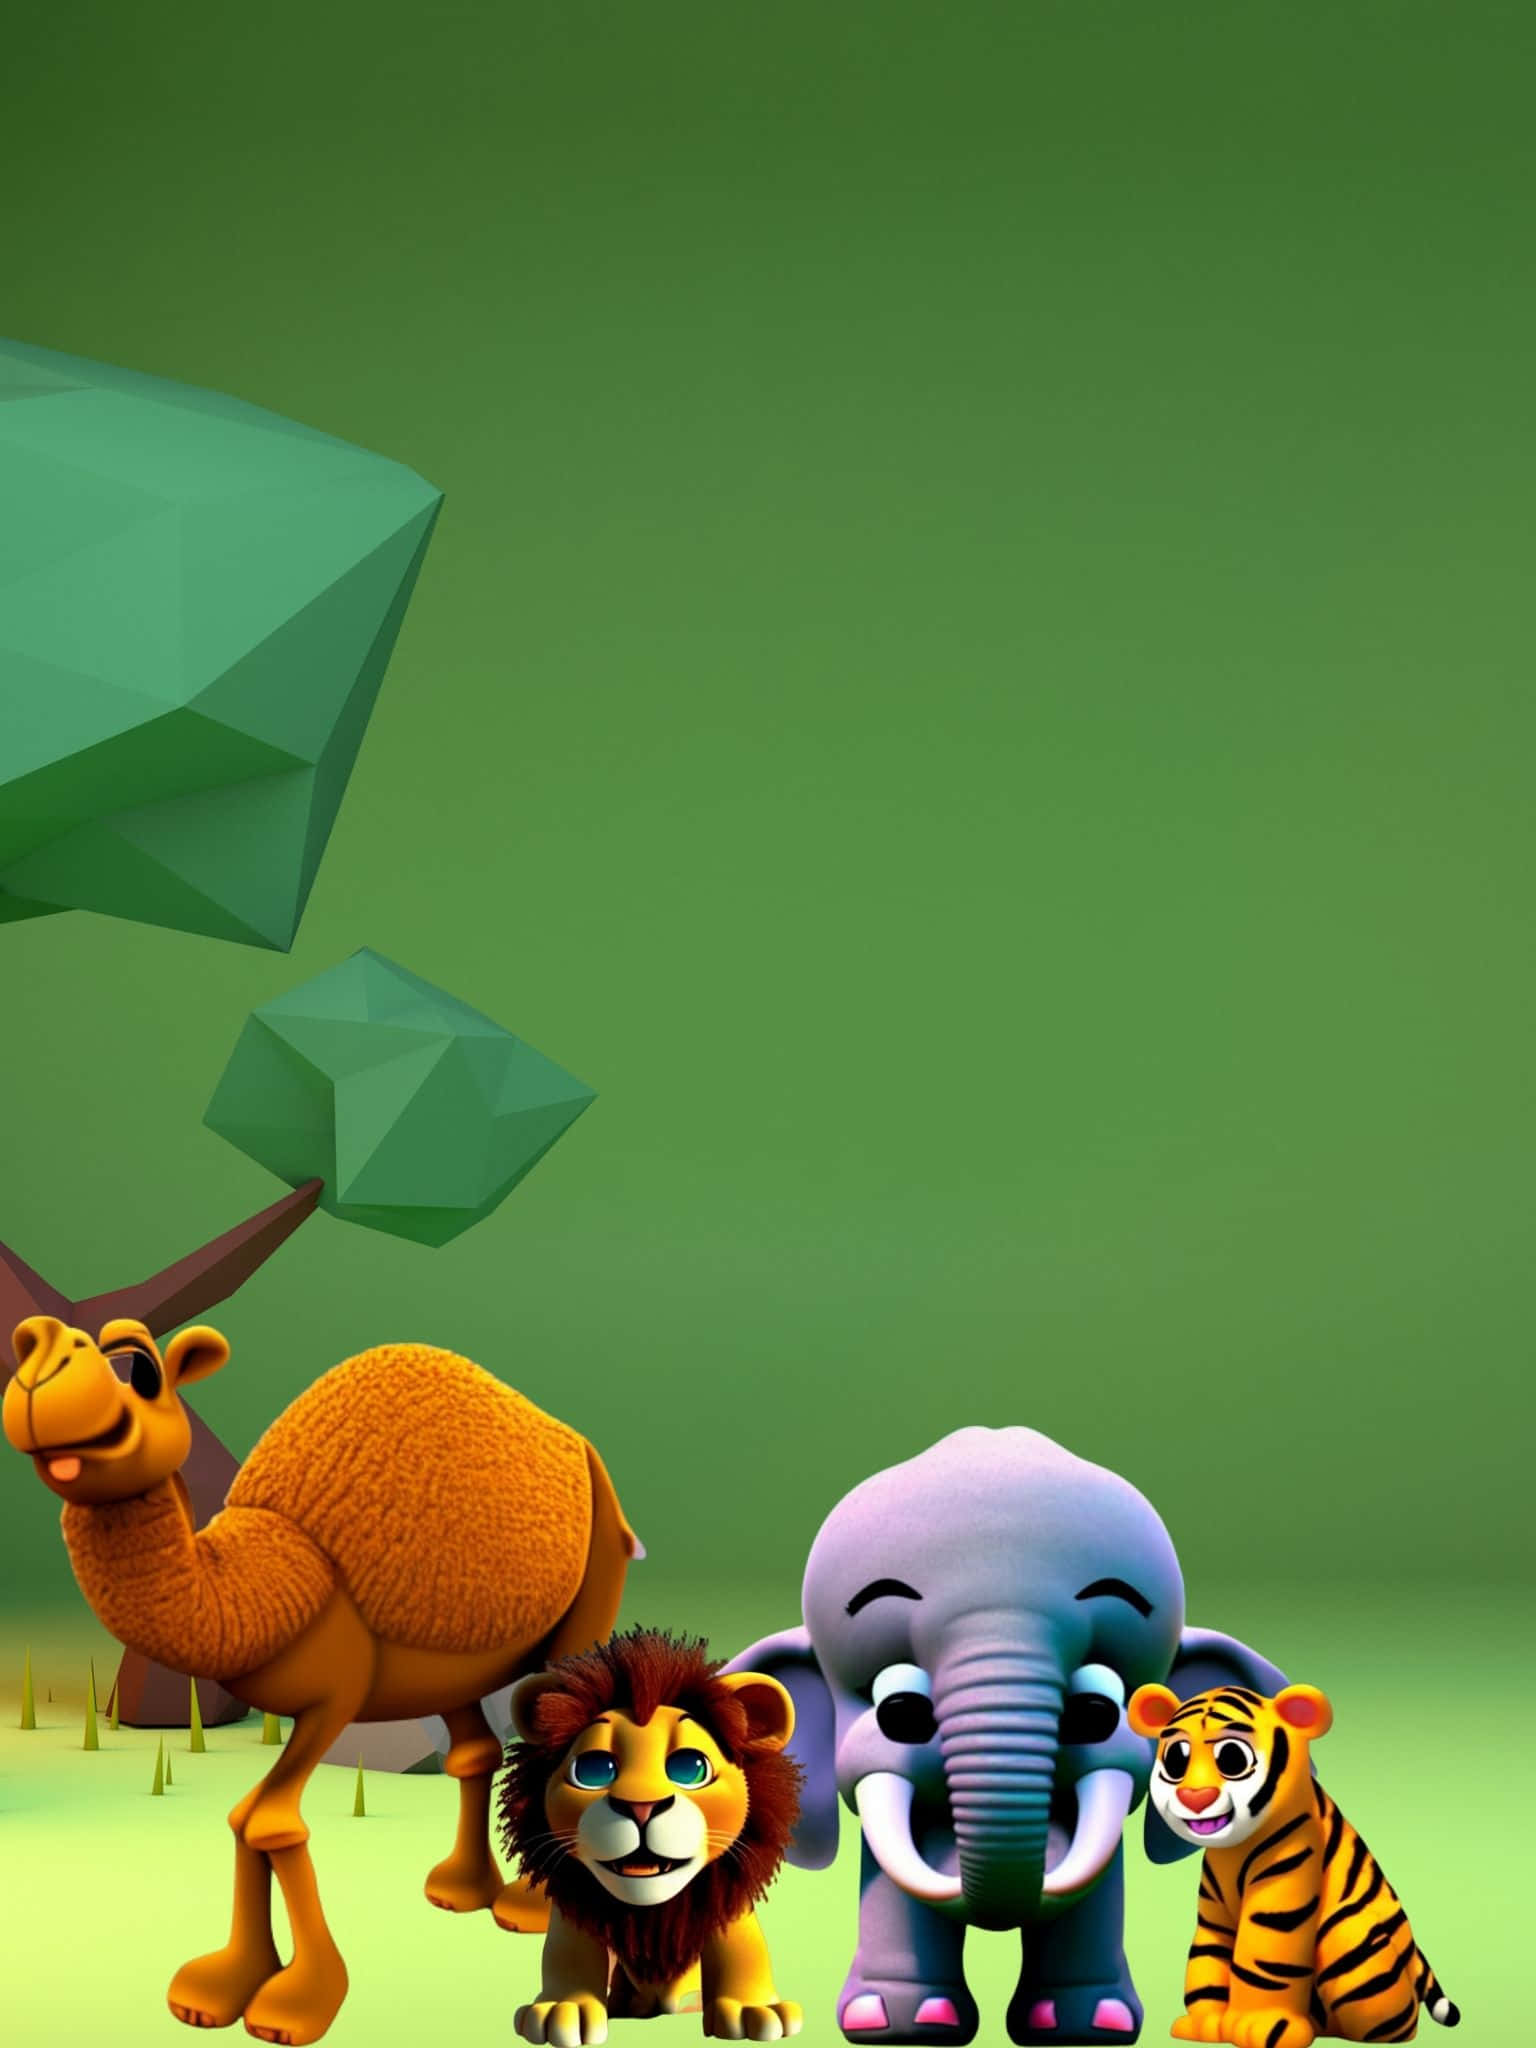 A Group Of Cartoon Animals In A Green Field Background